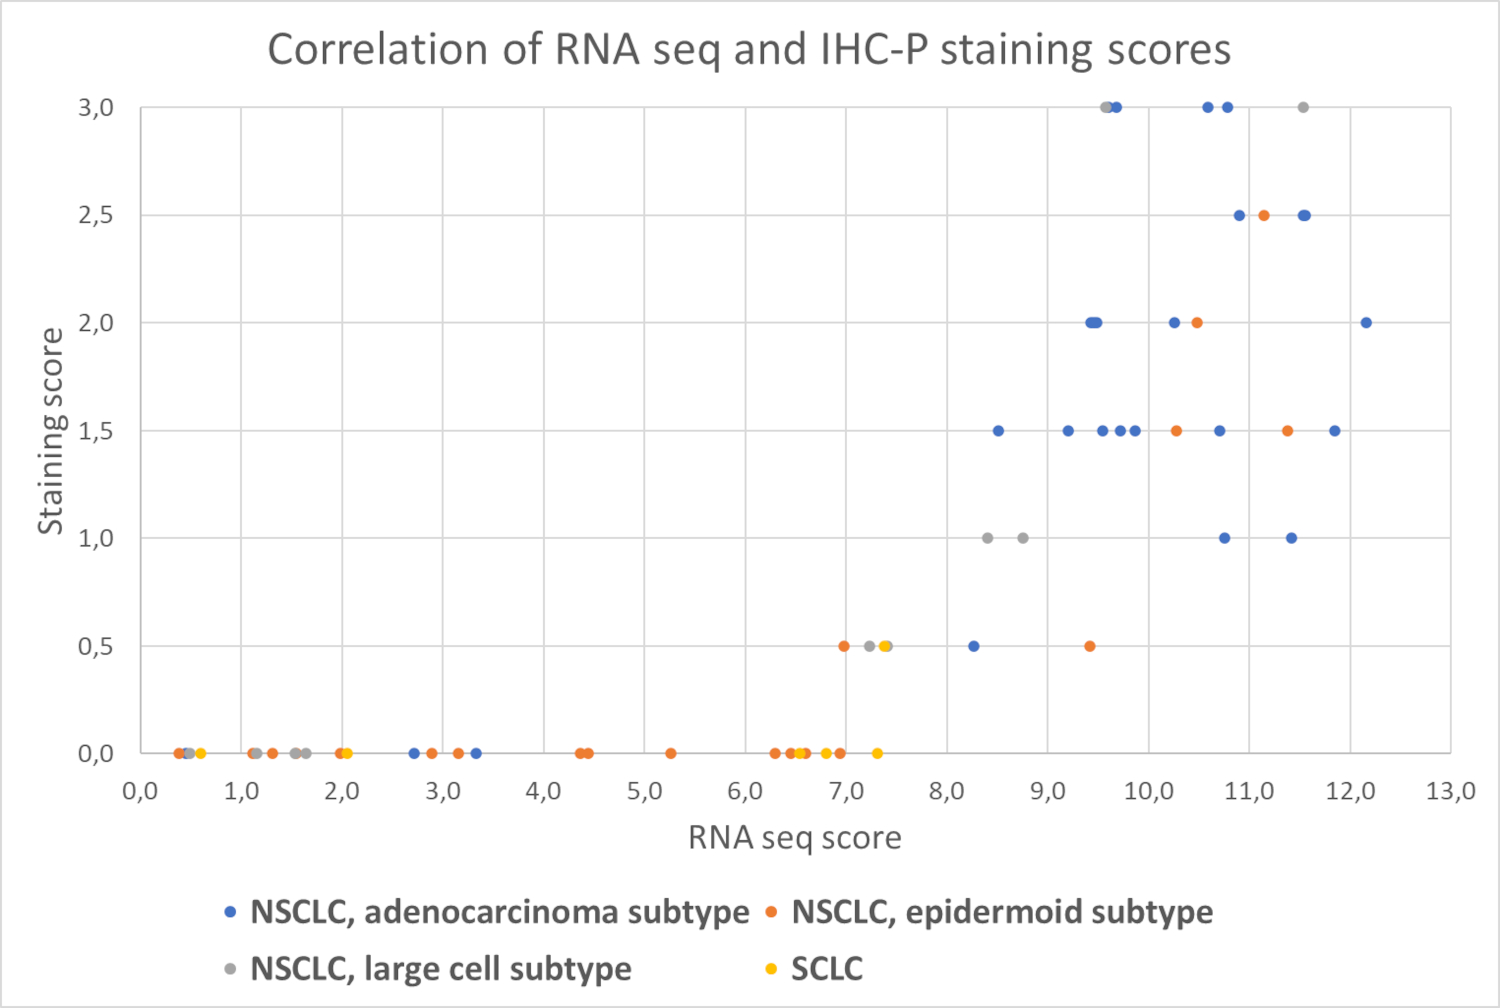 A dot-diagramm of correlation of RNAseq scores to CK7 staining scores in different lung cancer subtypes